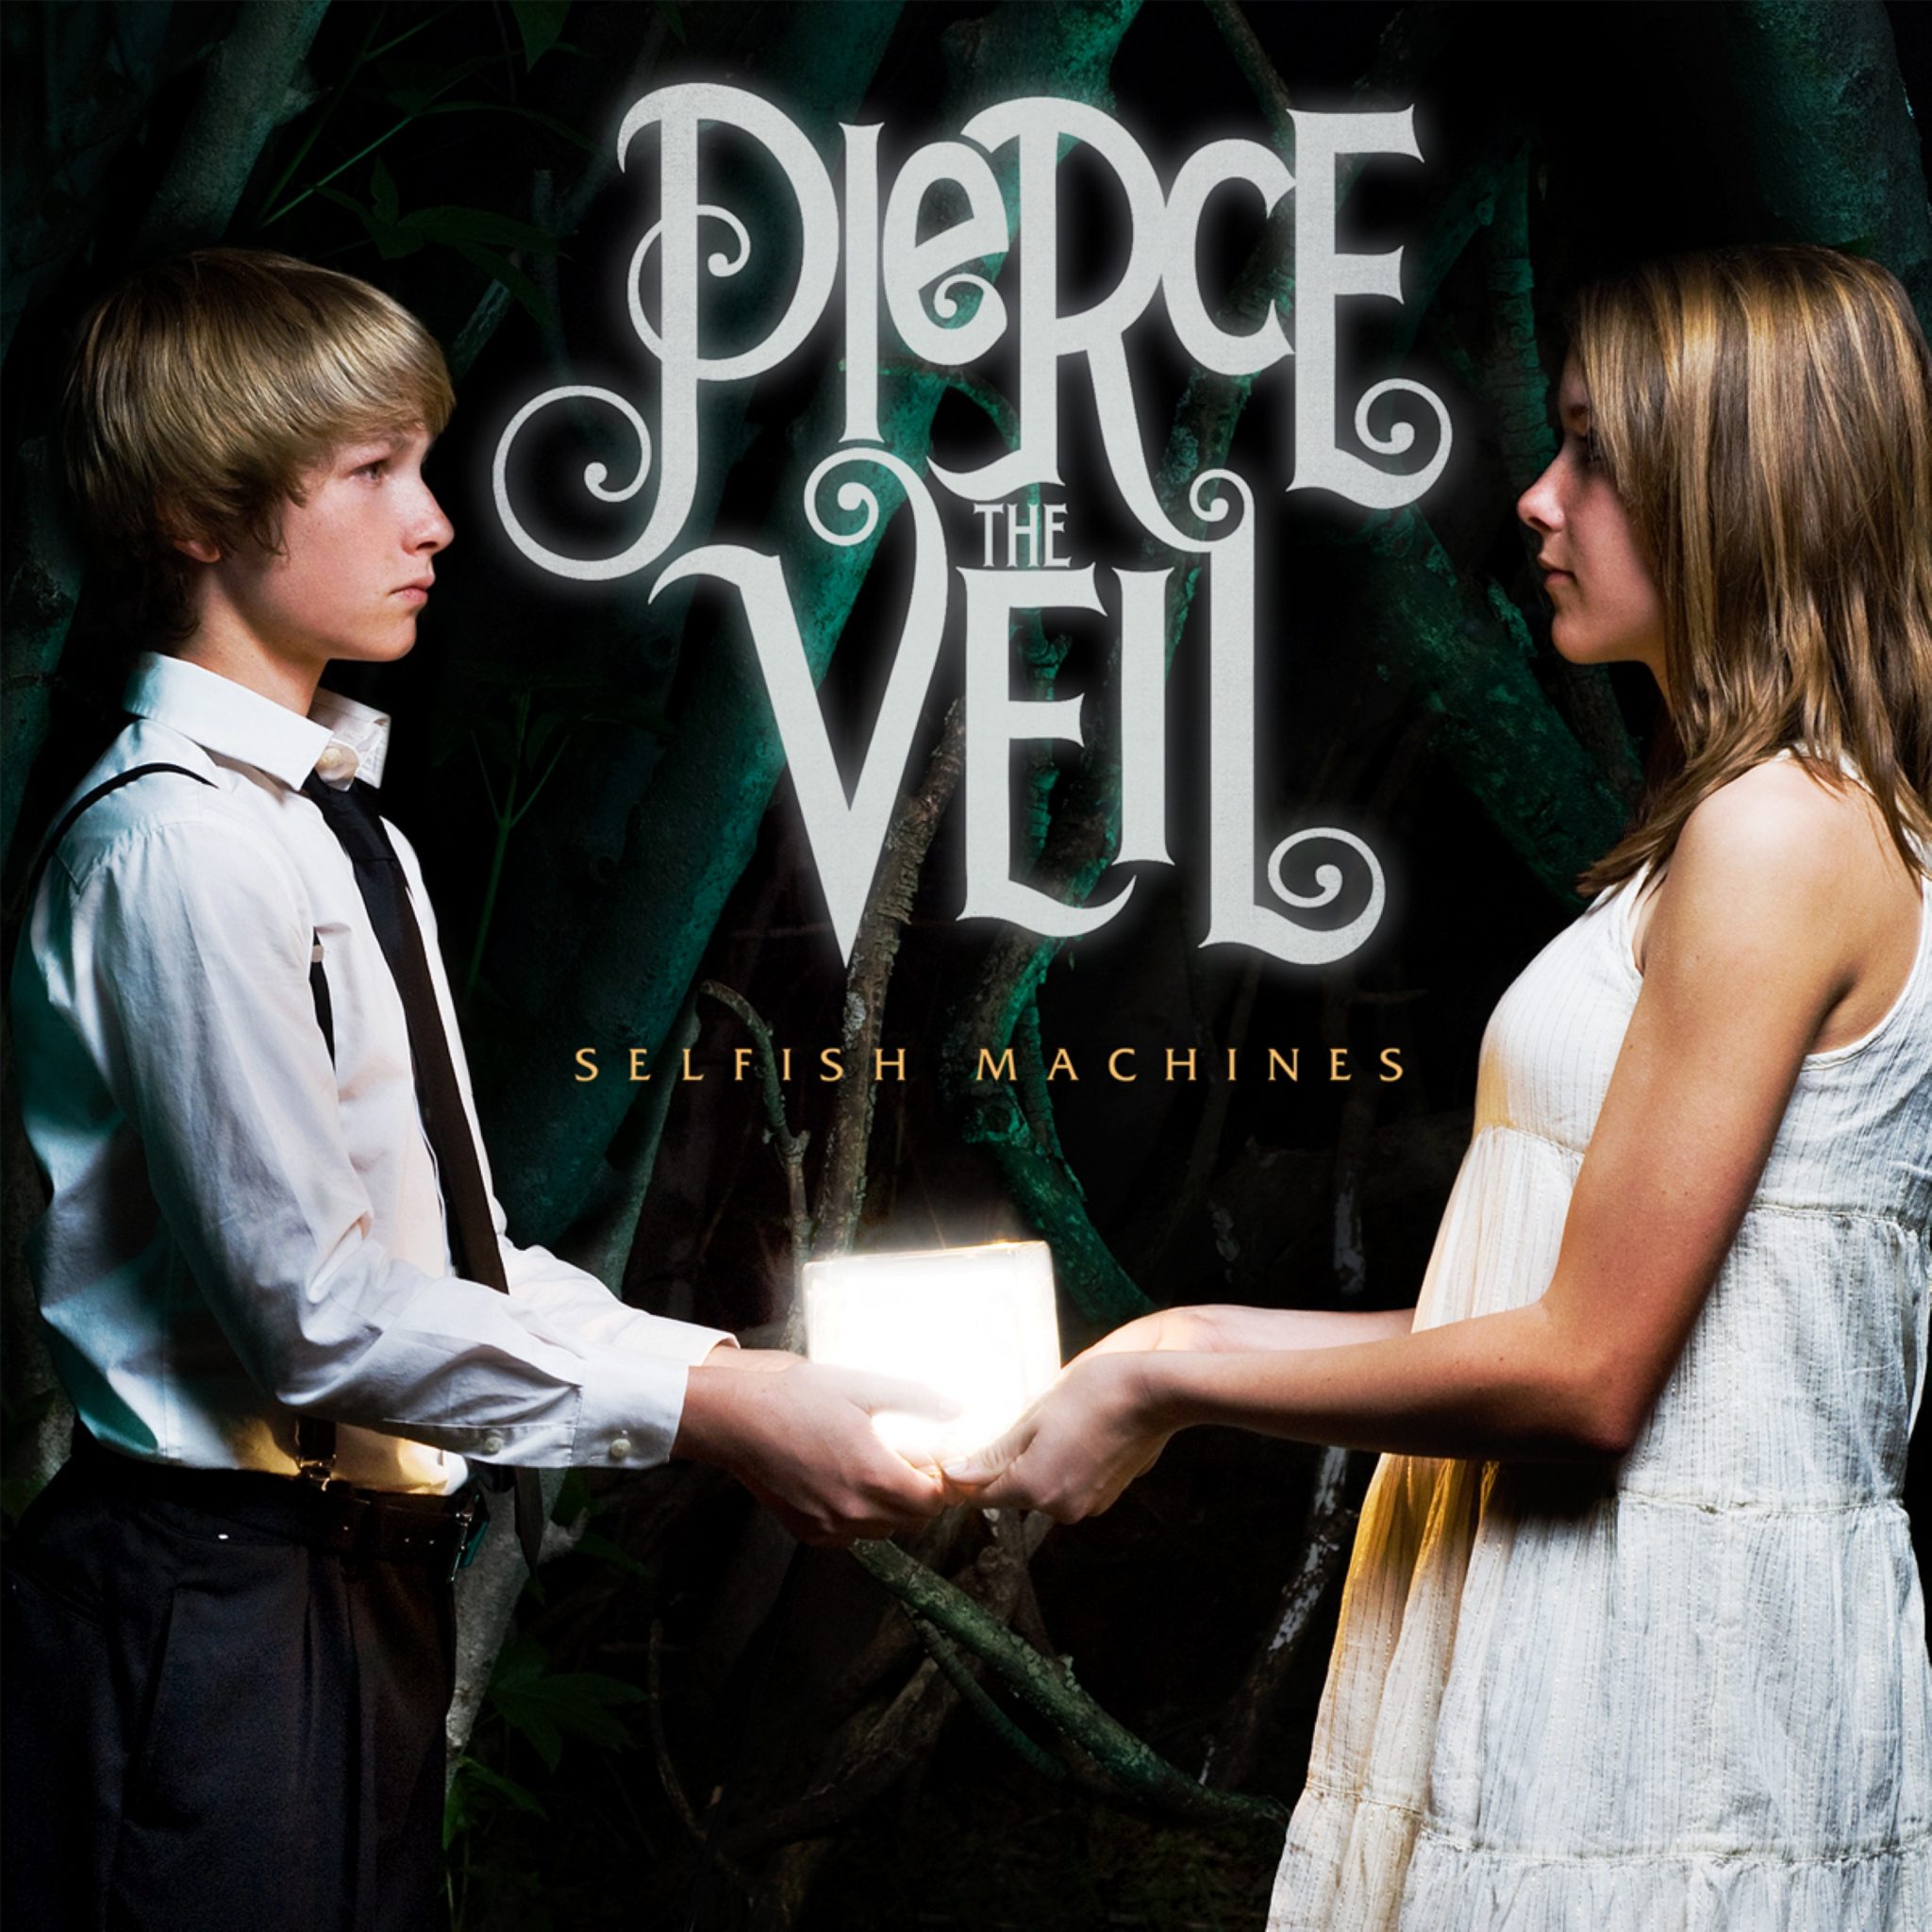 News Added Aug 09, 2013 Equal Vision Records have announced they will be reissuing Pierce The Veil's sophomore album, Selfish Machines on September 17th. The new version is fully remixed by Dan Korneff, who produced and mixed the band’s latest LP - Collide With The Sky. The reissue is also an expanded version of the […]